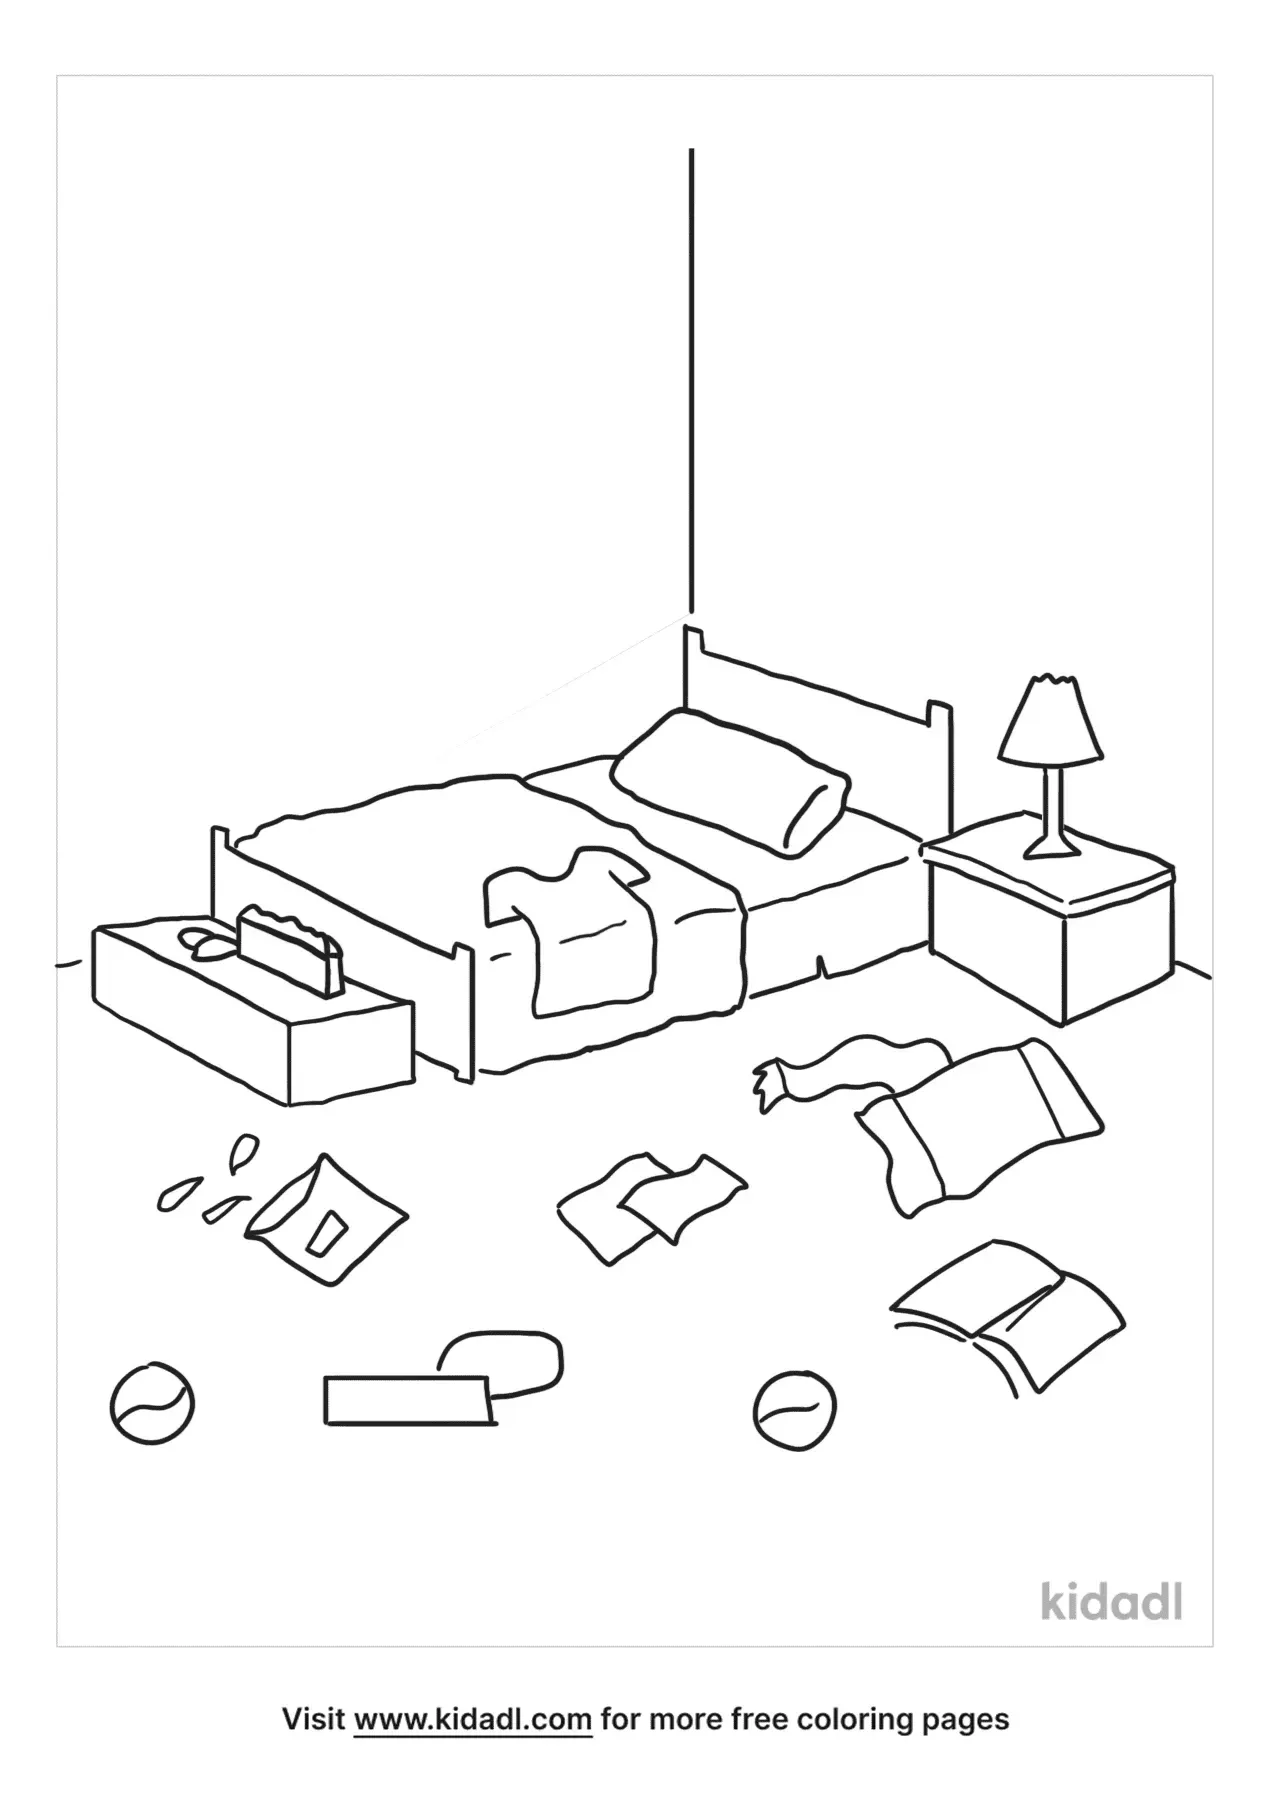 free-messy-room-coloring-page-coloring-page-printables-kidadl